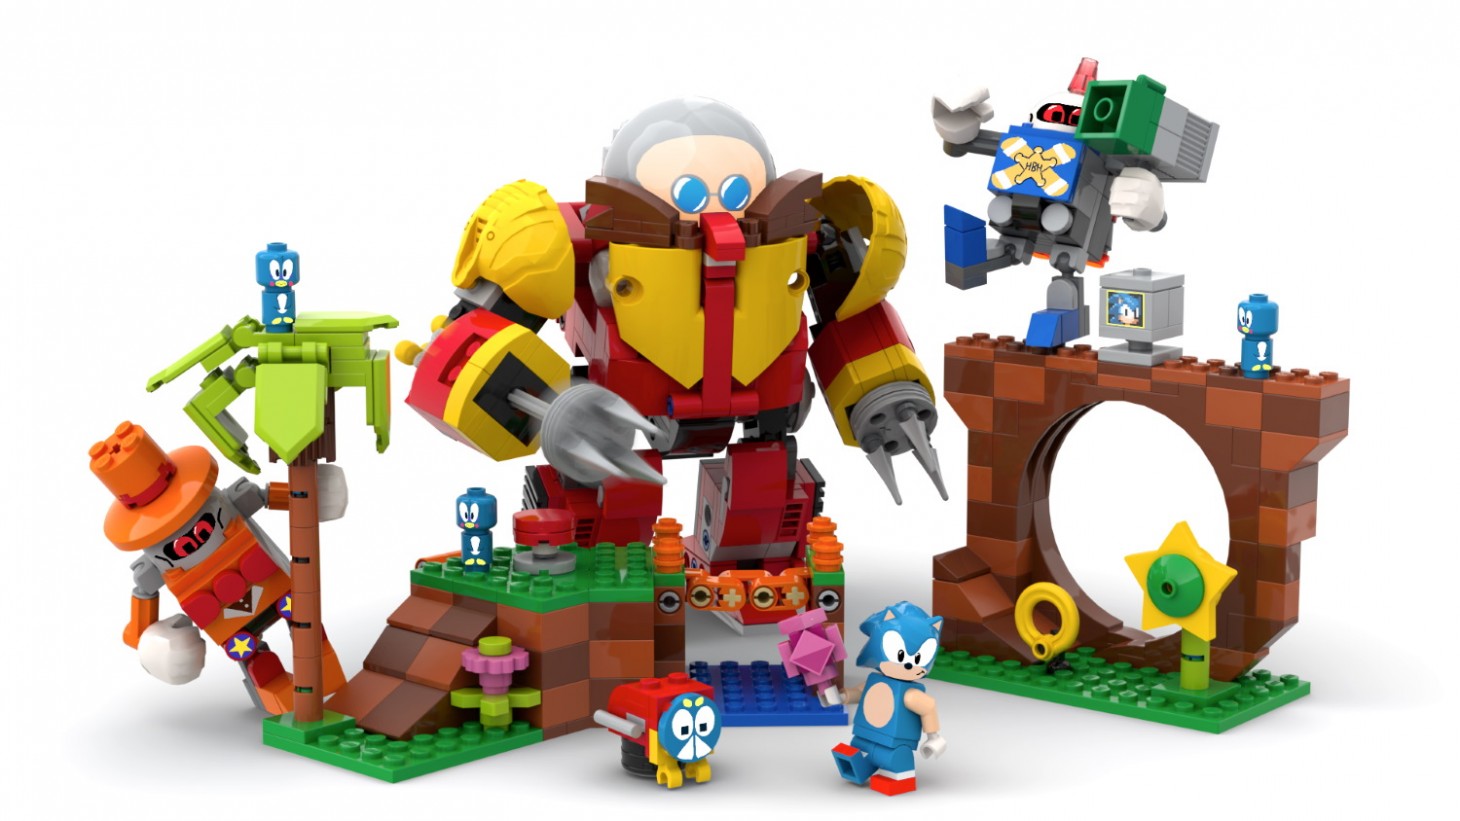 Lego Sonic The Hedgehog is now officially a thing in Lego Dimensions